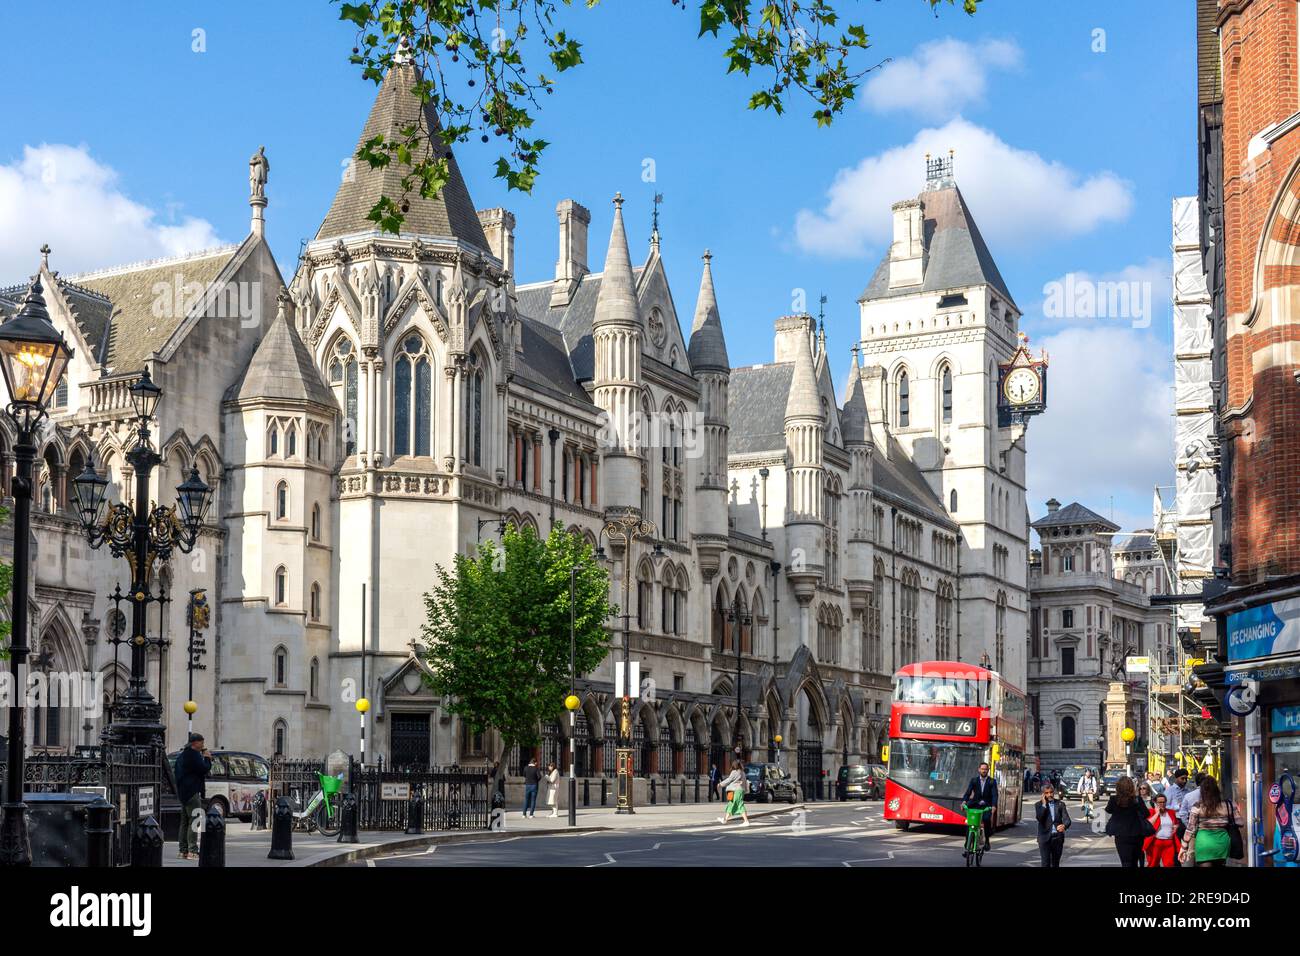 Royal Courts of Justice, The Strand, City of Westminster, Greater London, England, Regno Unito Foto Stock